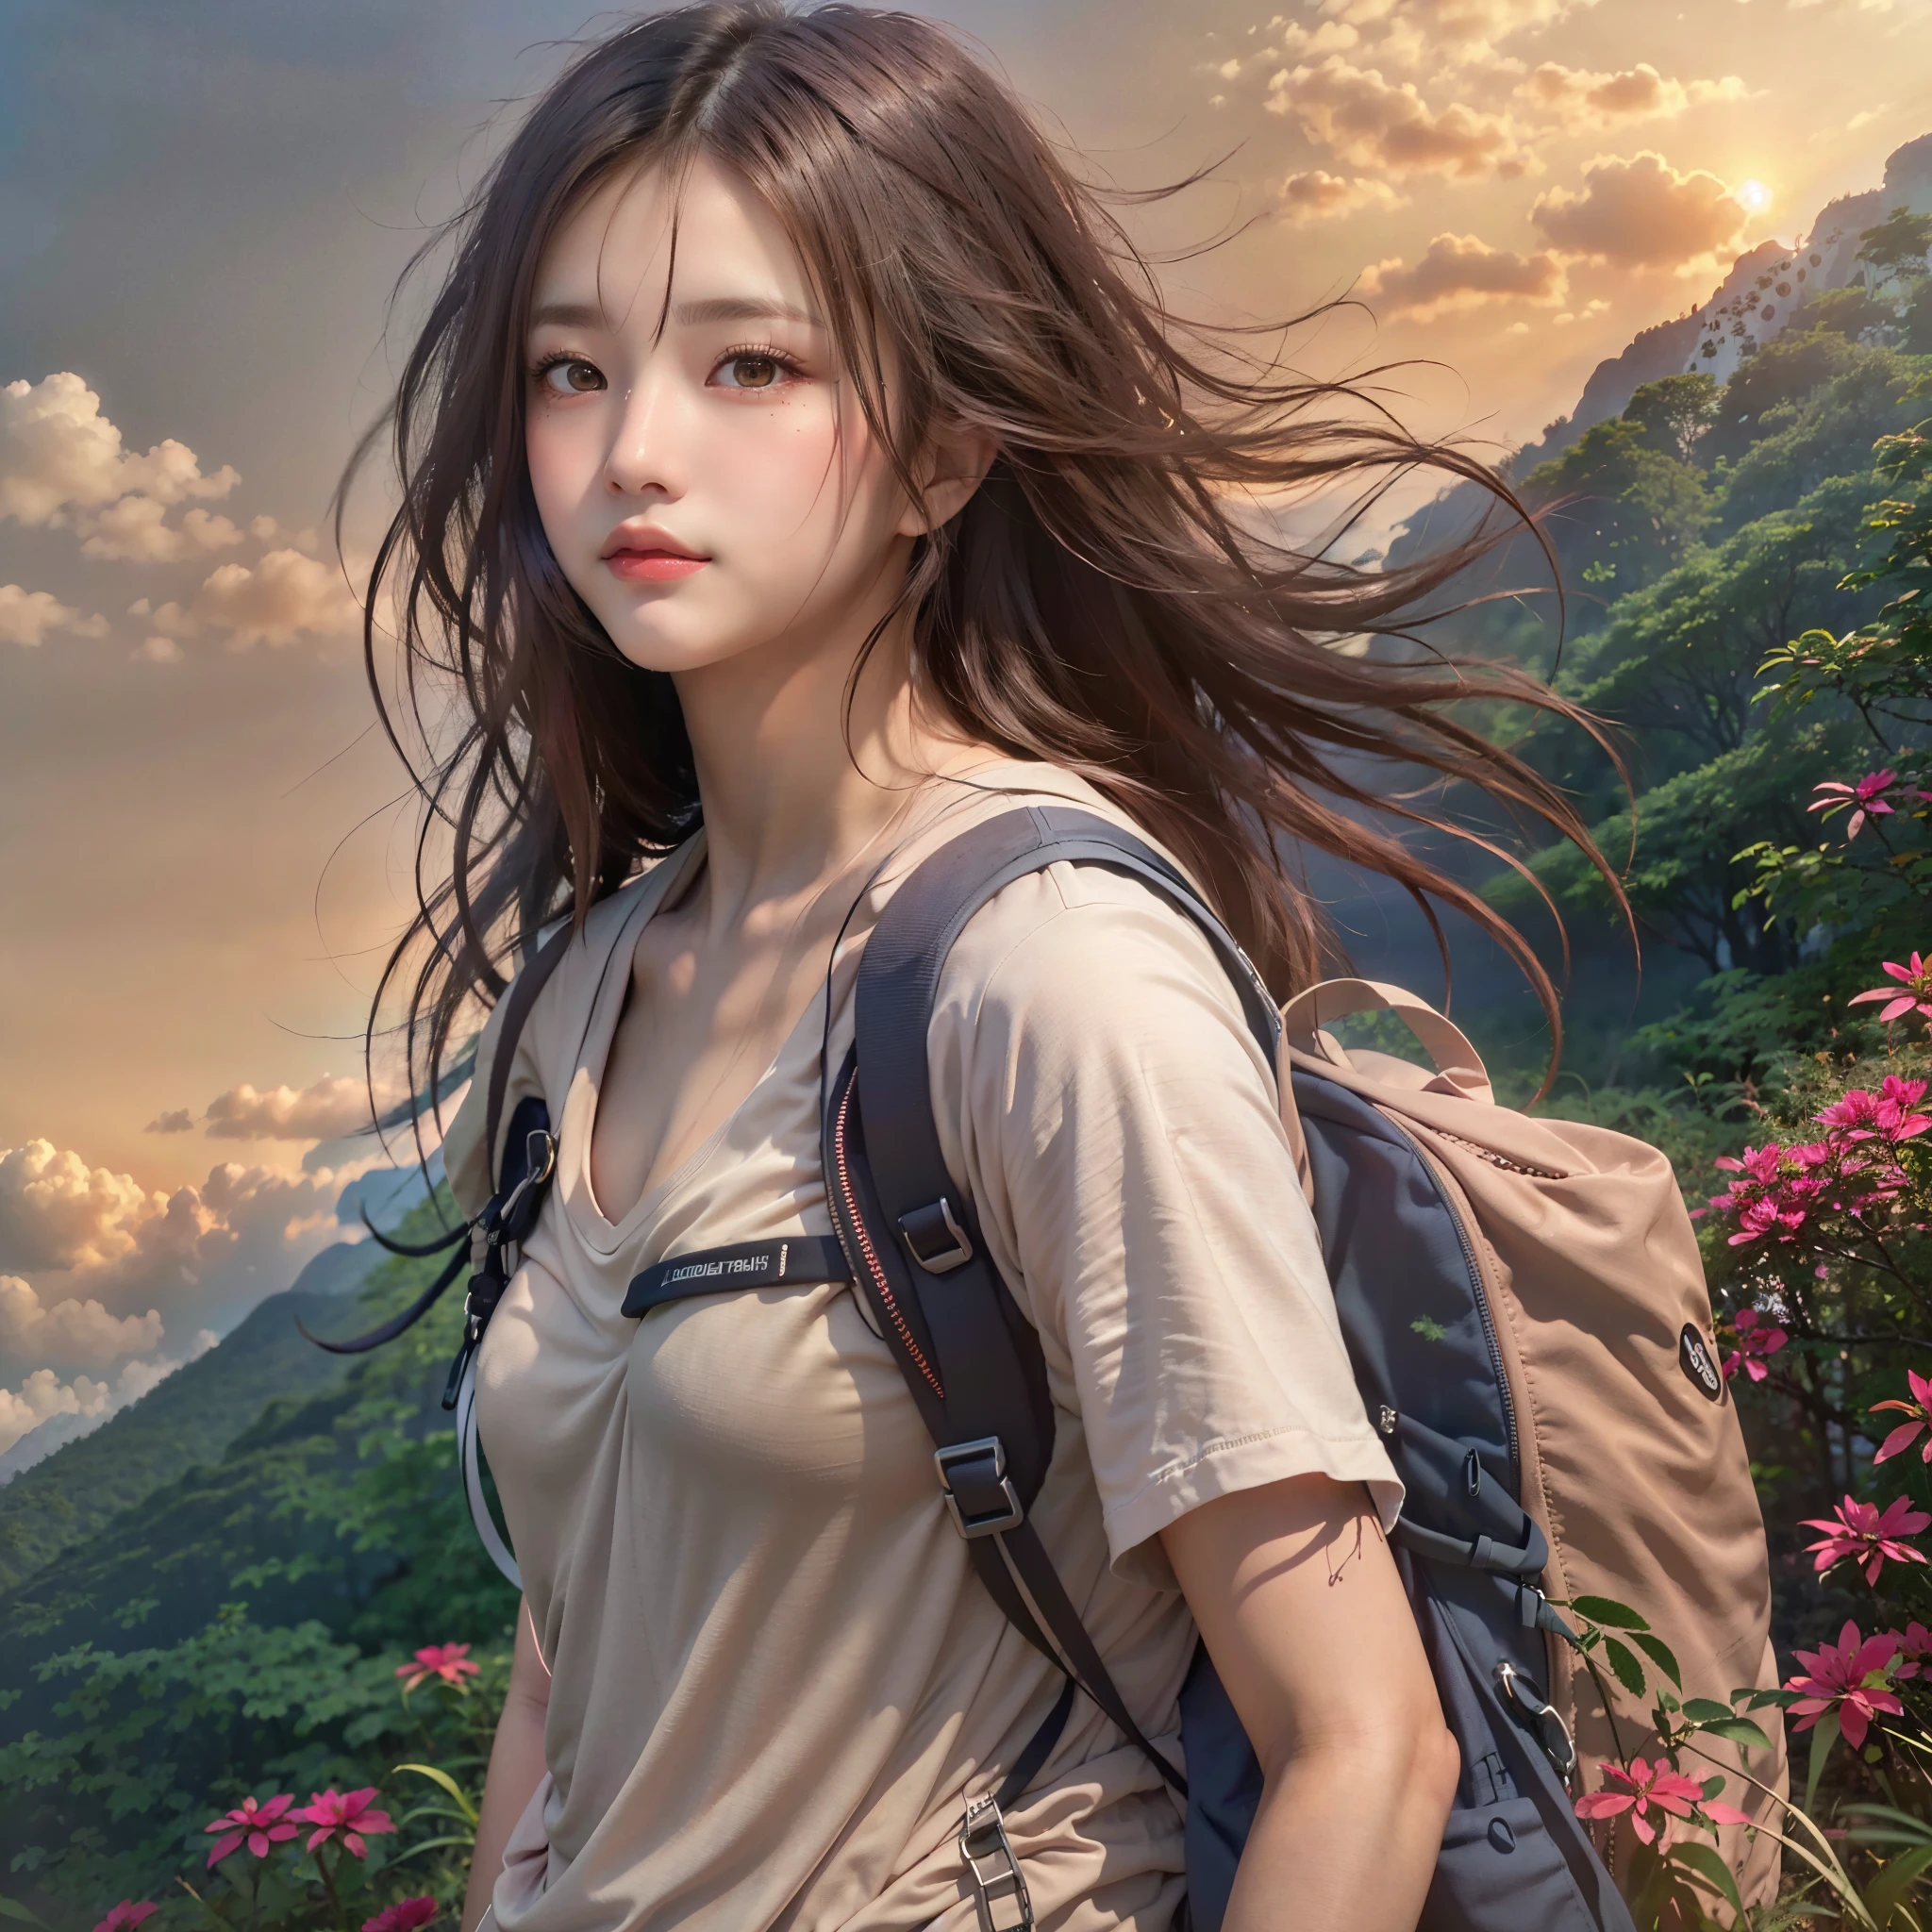 (Naturescape photography), (best quality), masterpiece:1.2, ultra high res, photorealistic:1.4, RAW photo, (Magnificent mountain, sea of clouds), (On a very high mountain peak), (sunset), (wideangle shot),  (Show cleavage:0.8),
(1girl), (Photo from the knee up:1.3), (25 years old), (smile:1.2), (shiny skin), (real skin), (semi-long hair, dark brown hair)
(Large white V-neck T-shirt, pink Trekking shorts), (Carrying a large backpack)
(ultra detailed face), (ultra Beautiful fece), (ultra detailed eyes), (ultra detailed nose), (ultra detailed mouth), (ultra detailed arms), (ultra detailed body), pan focus, looking at the audience, Colored leaves, autumnal